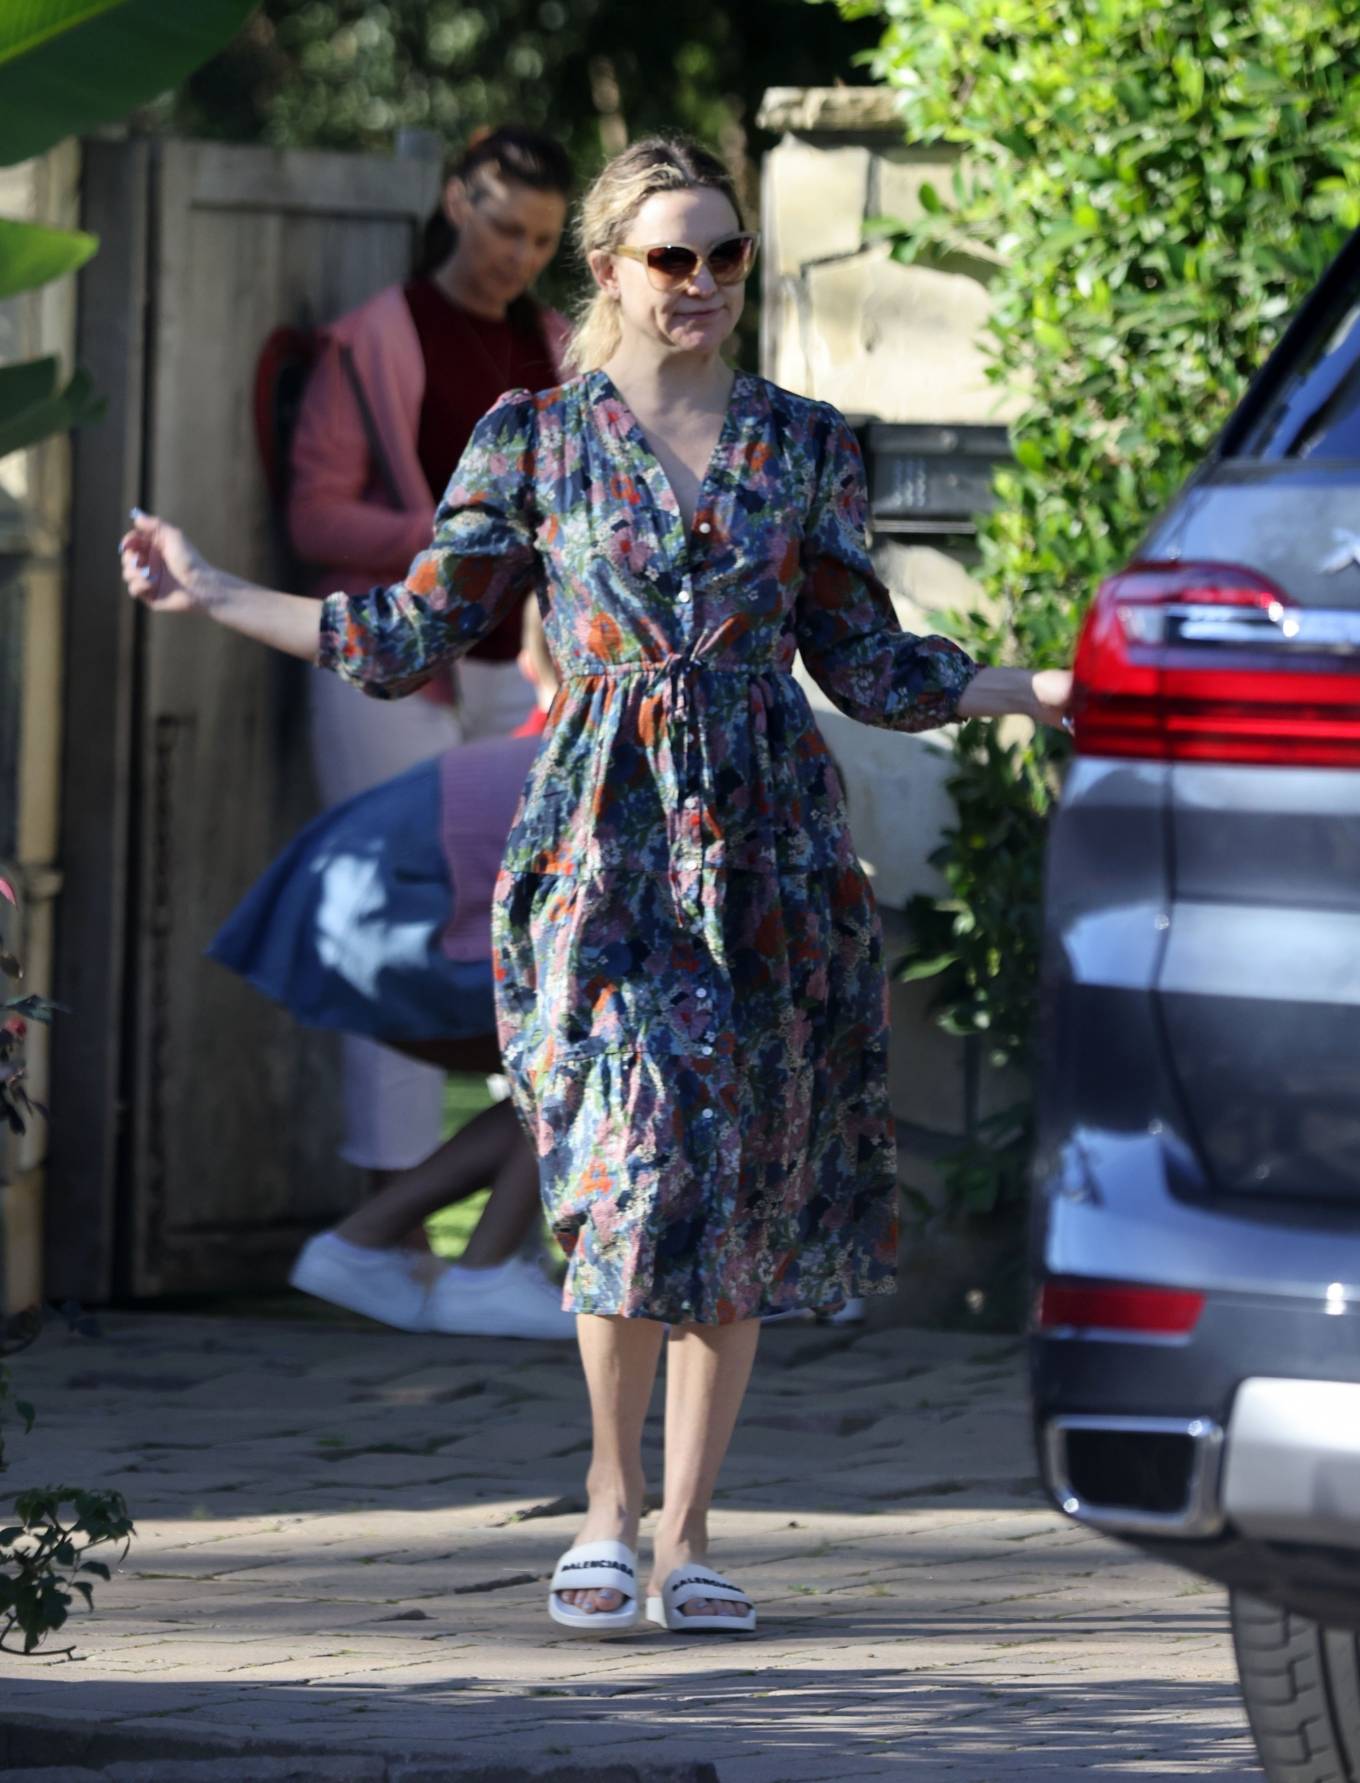 Kate Hudson - Wears a flower dress while out in Los Angeles